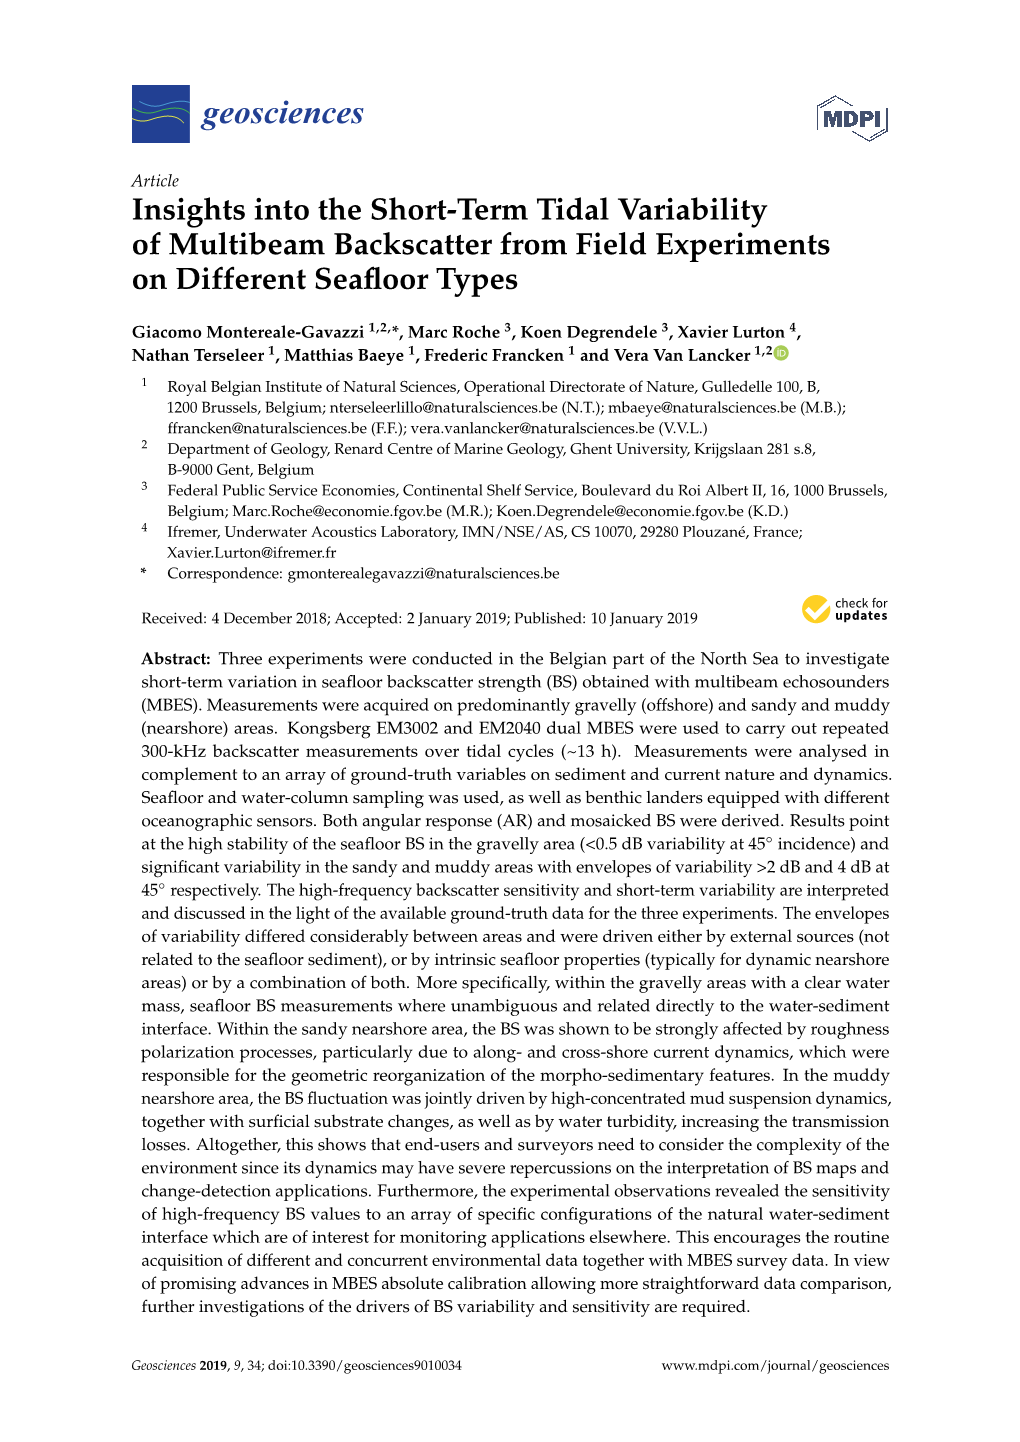 Insights Into the Short-Term Tidal Variability of Multibeam Backscatter from Field Experiments on Different Seaﬂoor Types